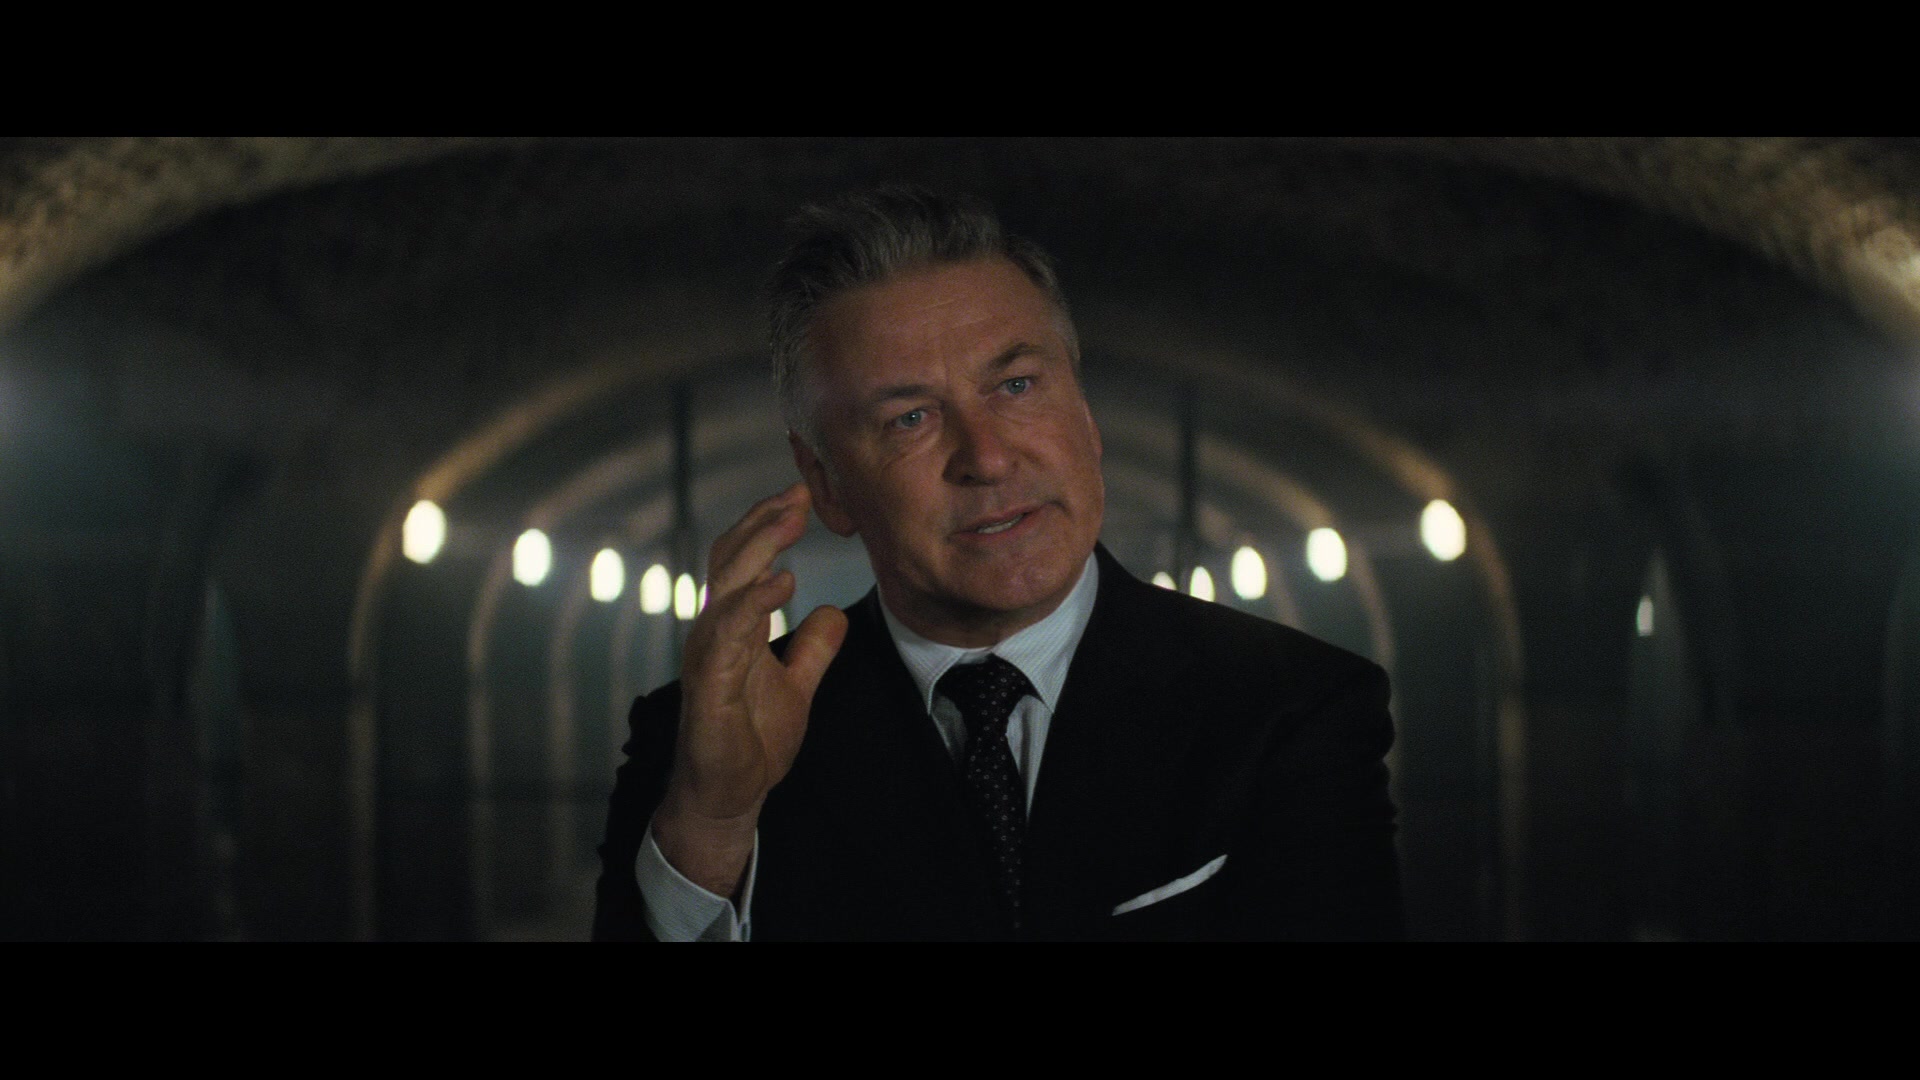 Alan Hunley (Alec Baldwin) debriefs the IMF via Mission: Impossible - Fallout (2018), Paramount Pictures